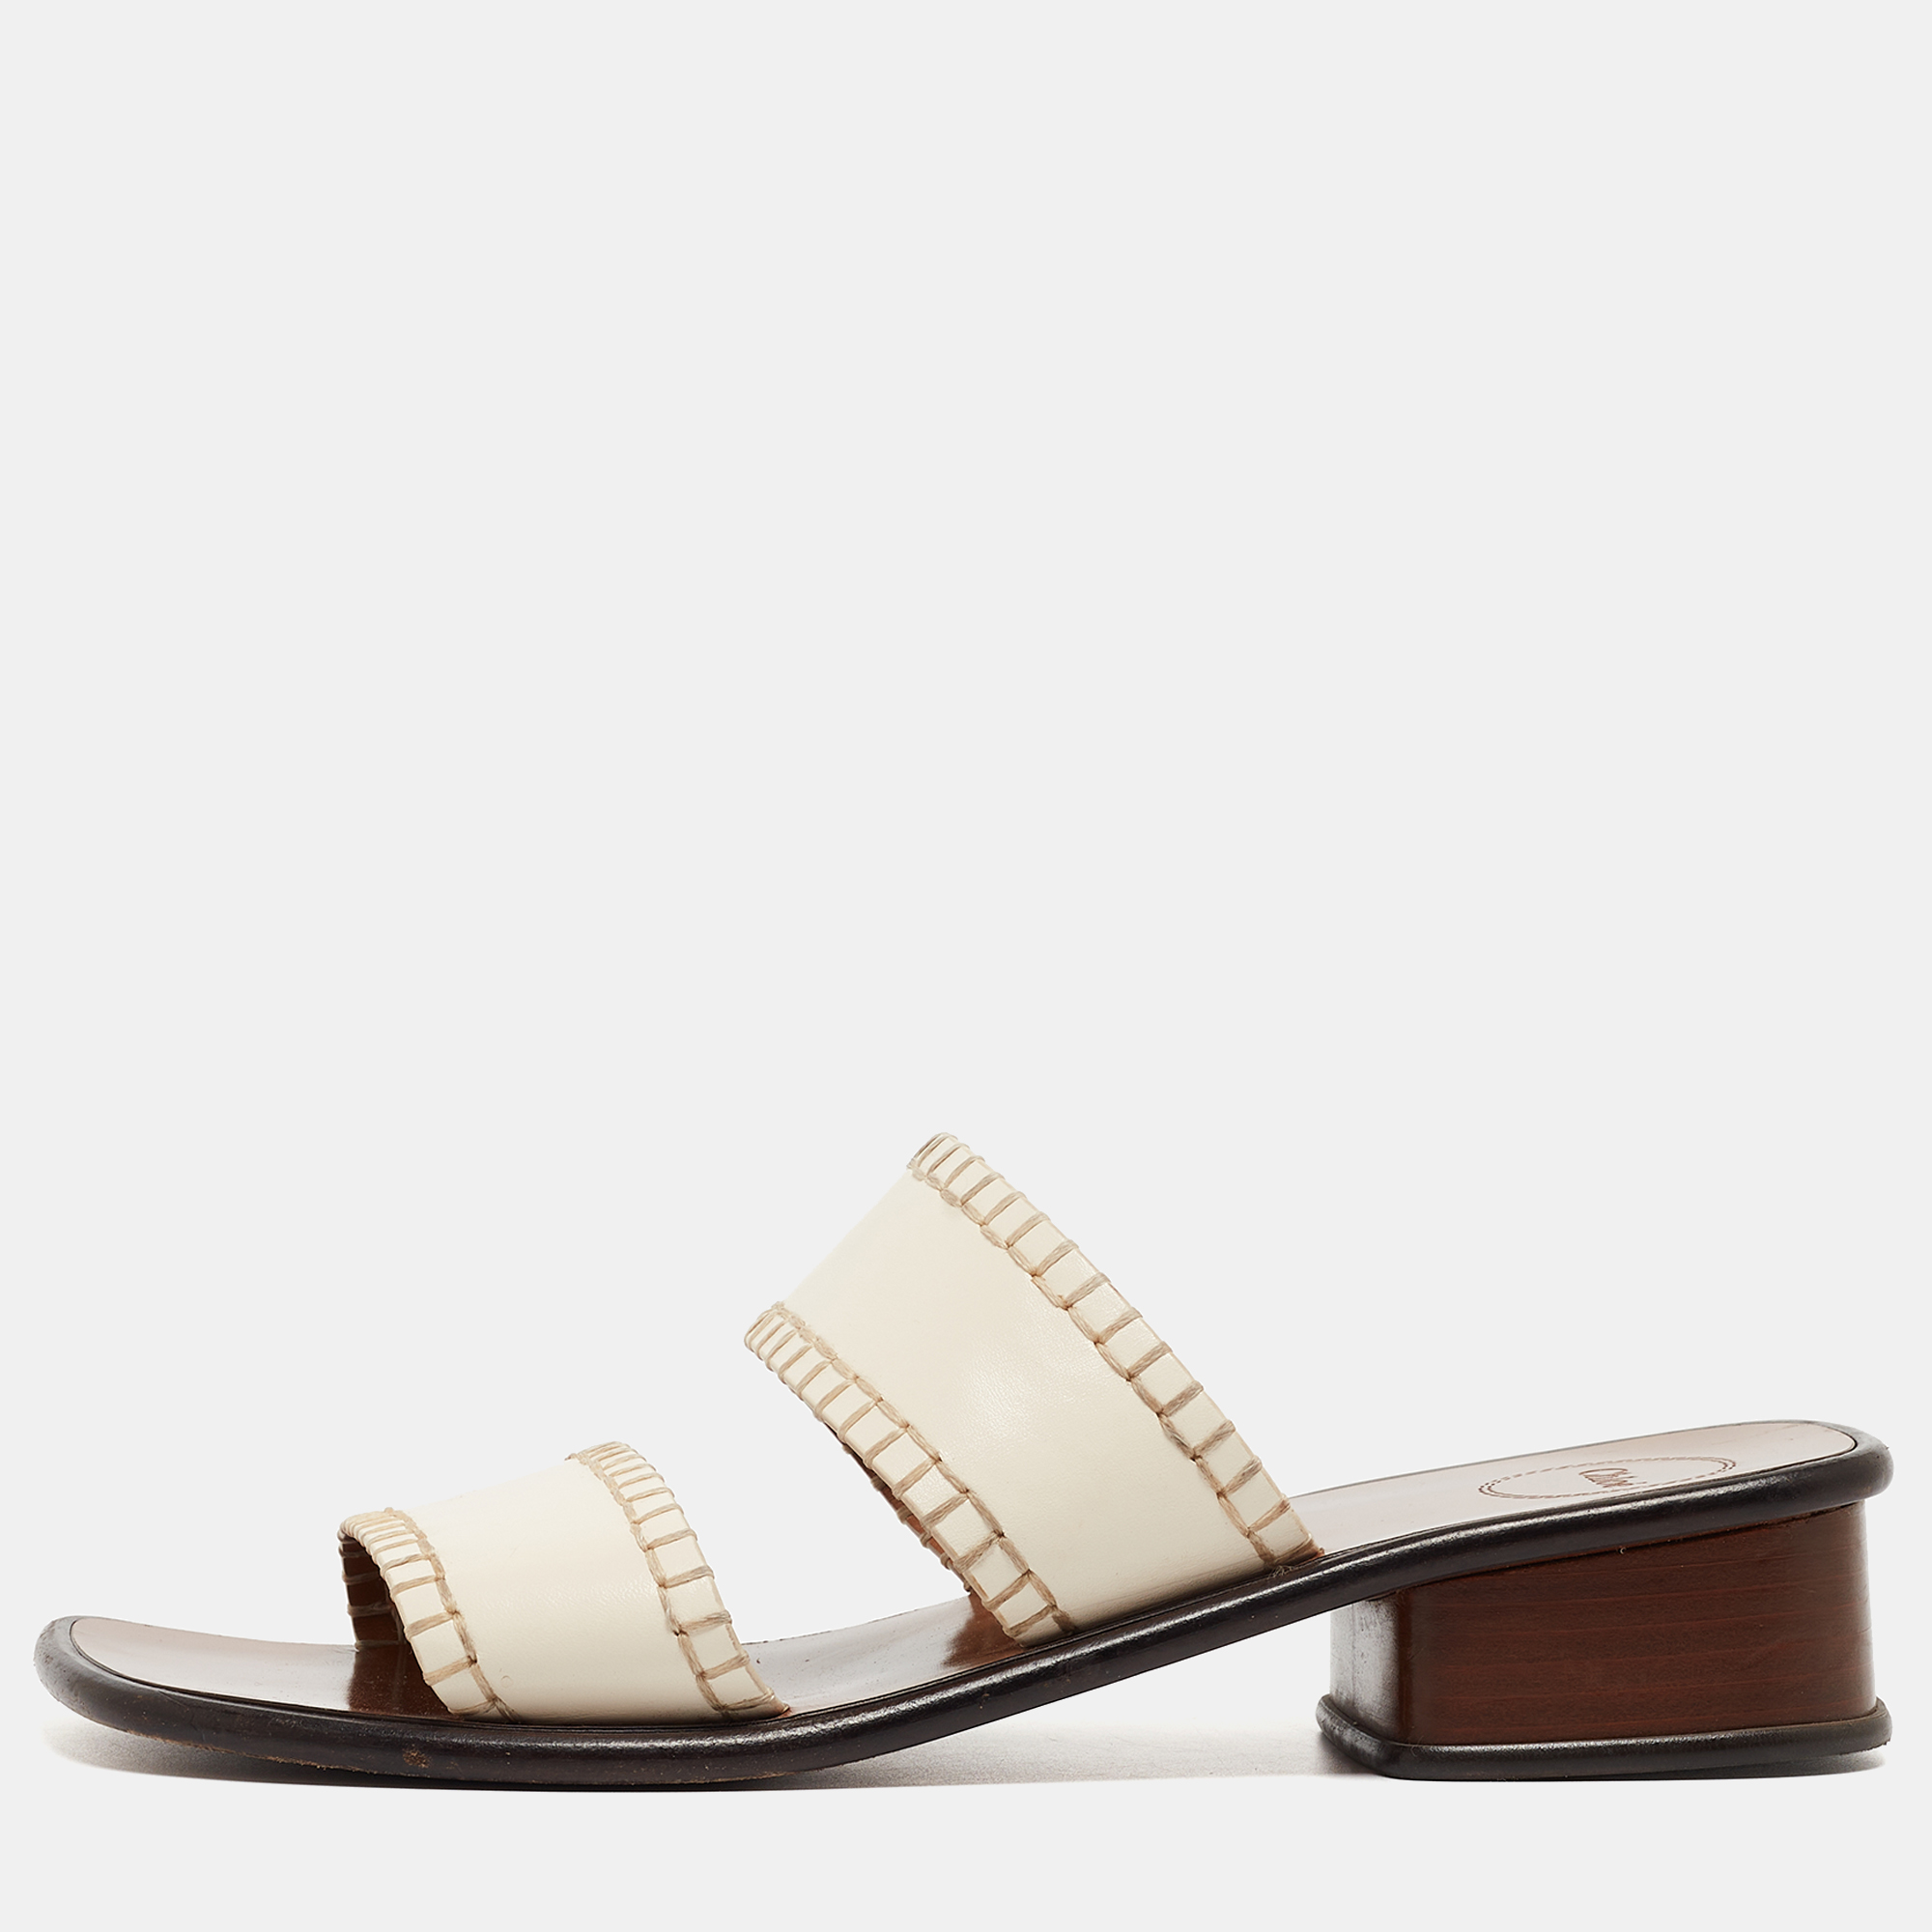 Pre-owned Chloé Cream Leather Flat Slides Size 40.5